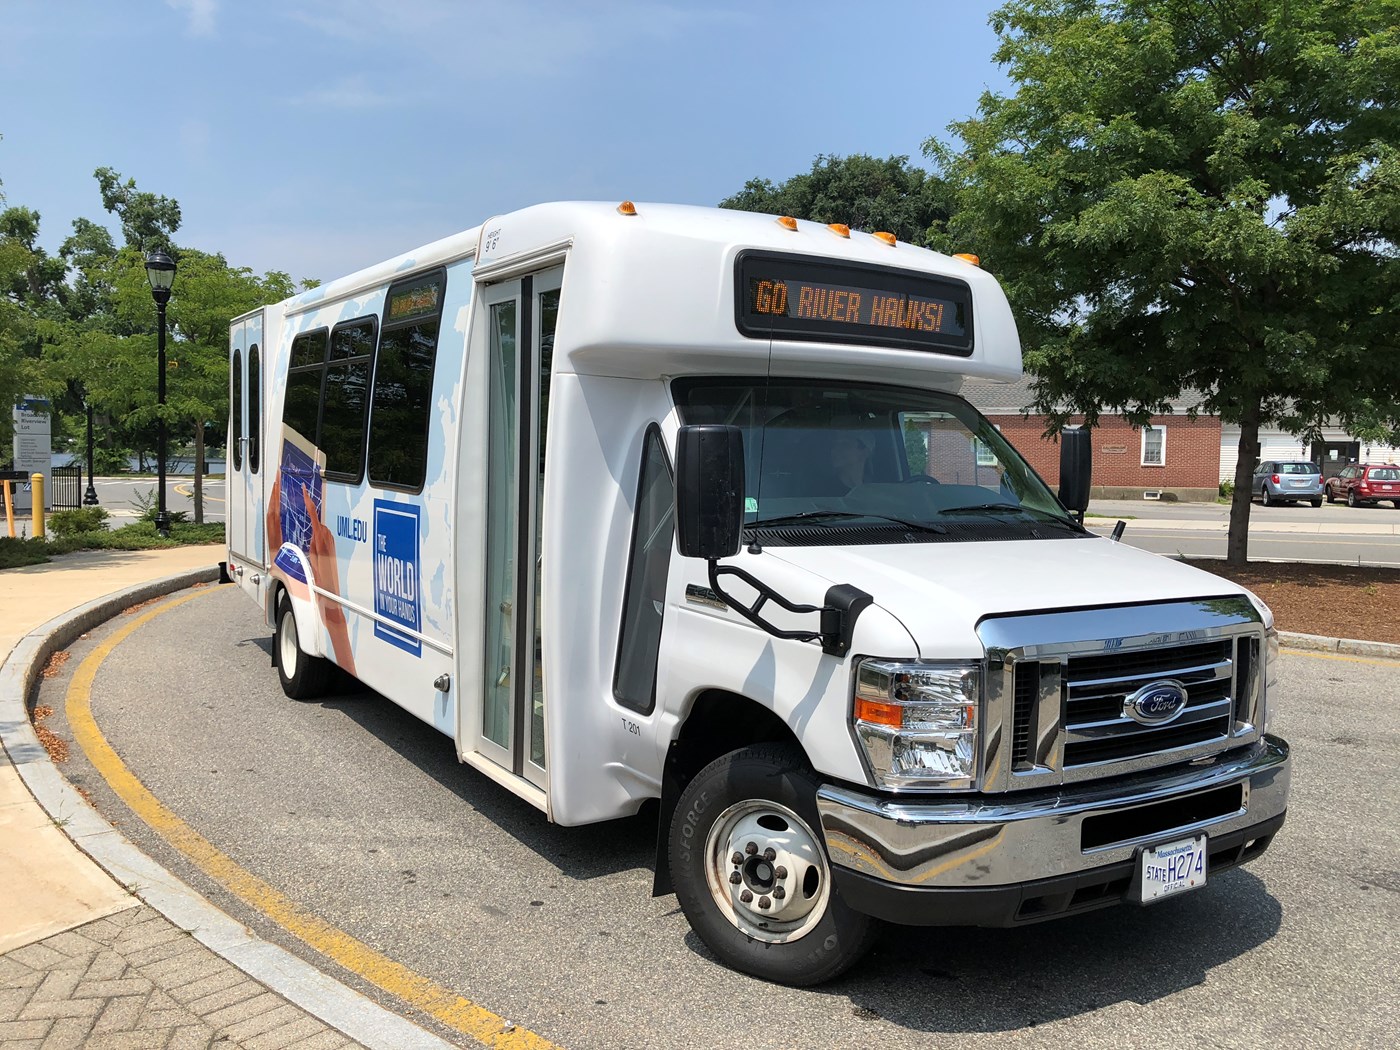 A white UMass Lowell shuttle stopped at a bus stop on South Campus. The LED sign in the front reads "Go Riverhawks".